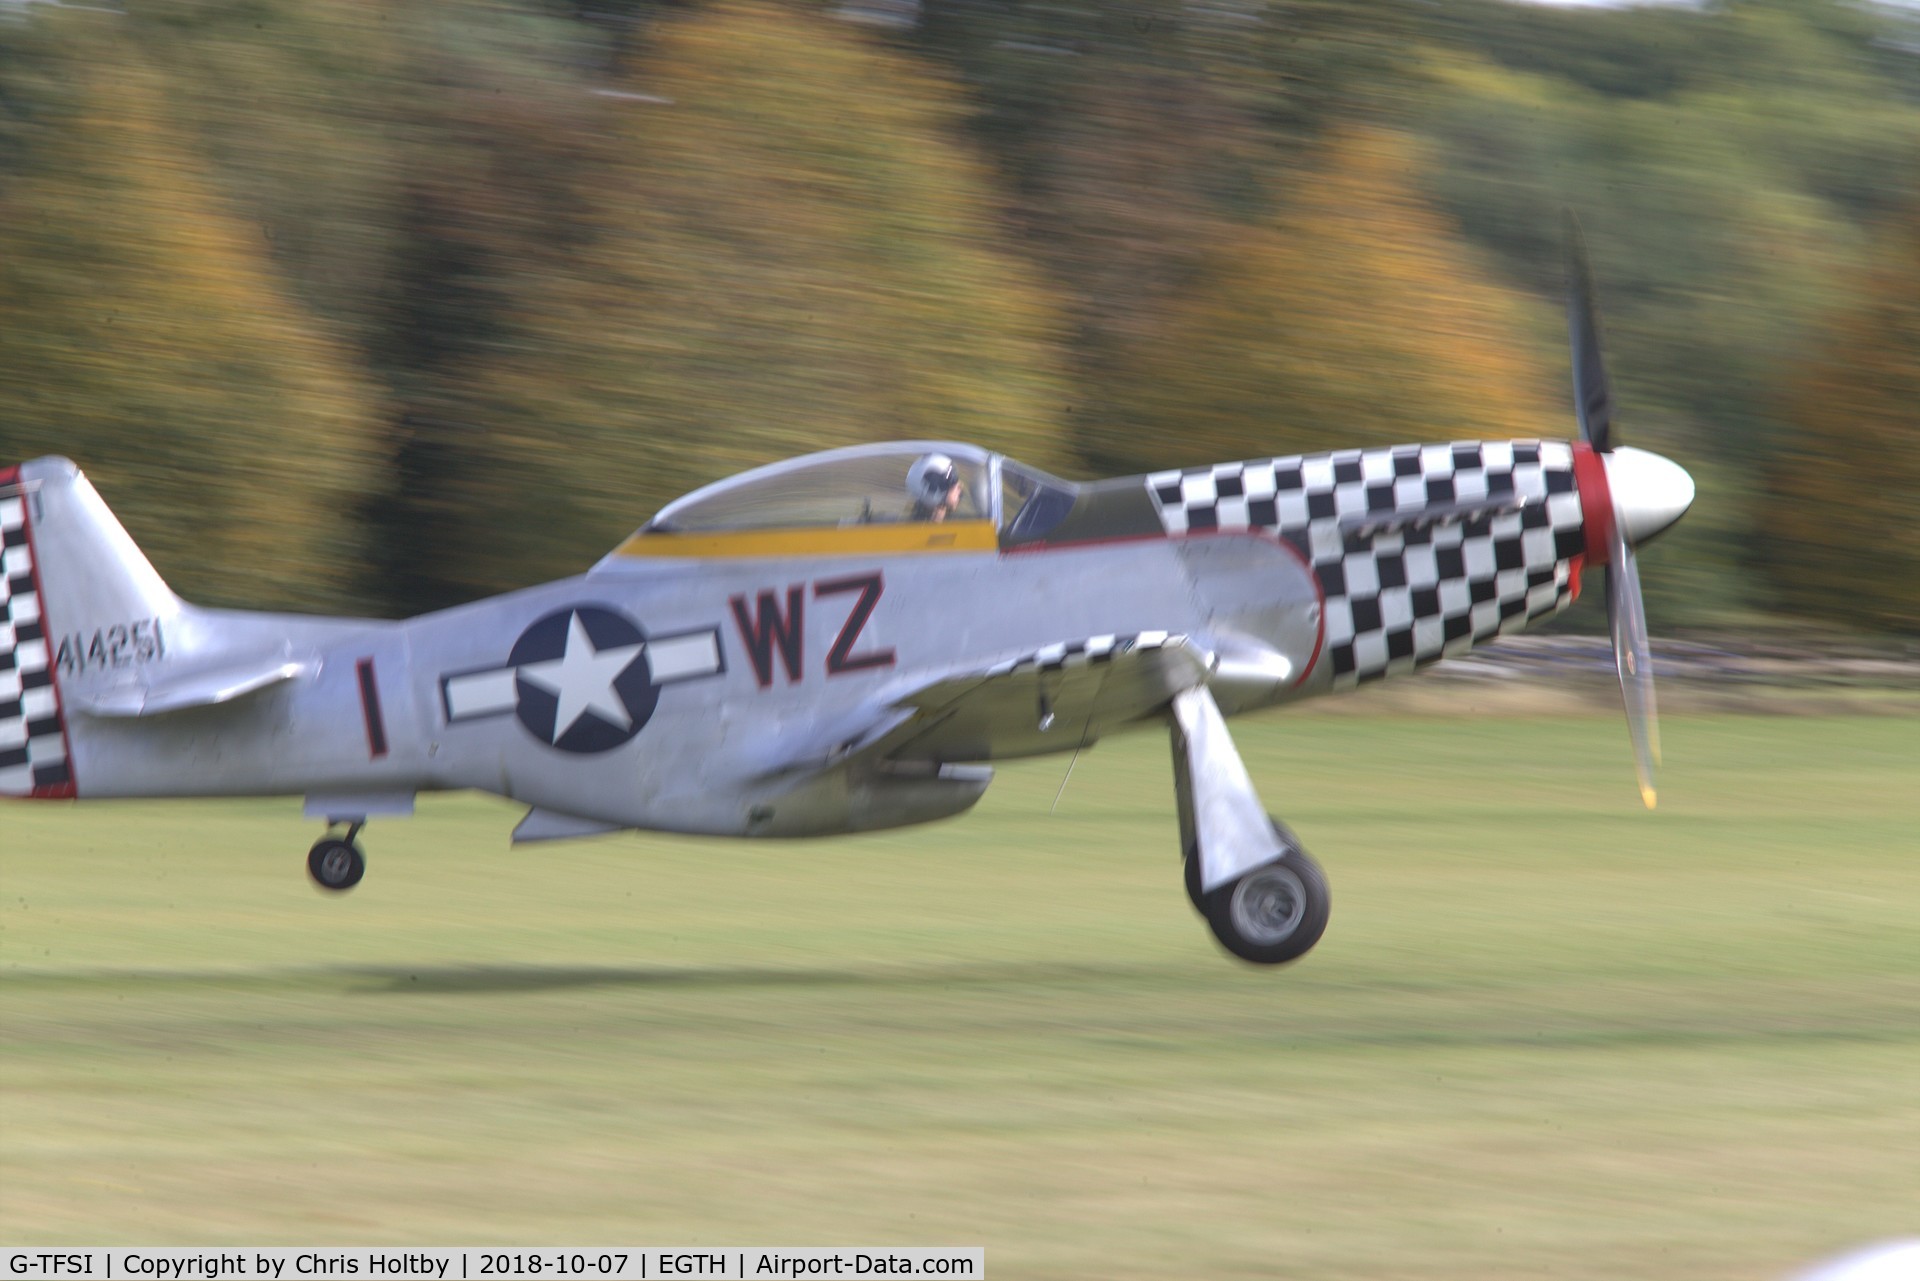 G-TFSI, 1944 North American TF-51D Mustang C/N 124-44703, Taking off at Old Warden to take part in the Shuttleworth Race Day 2018